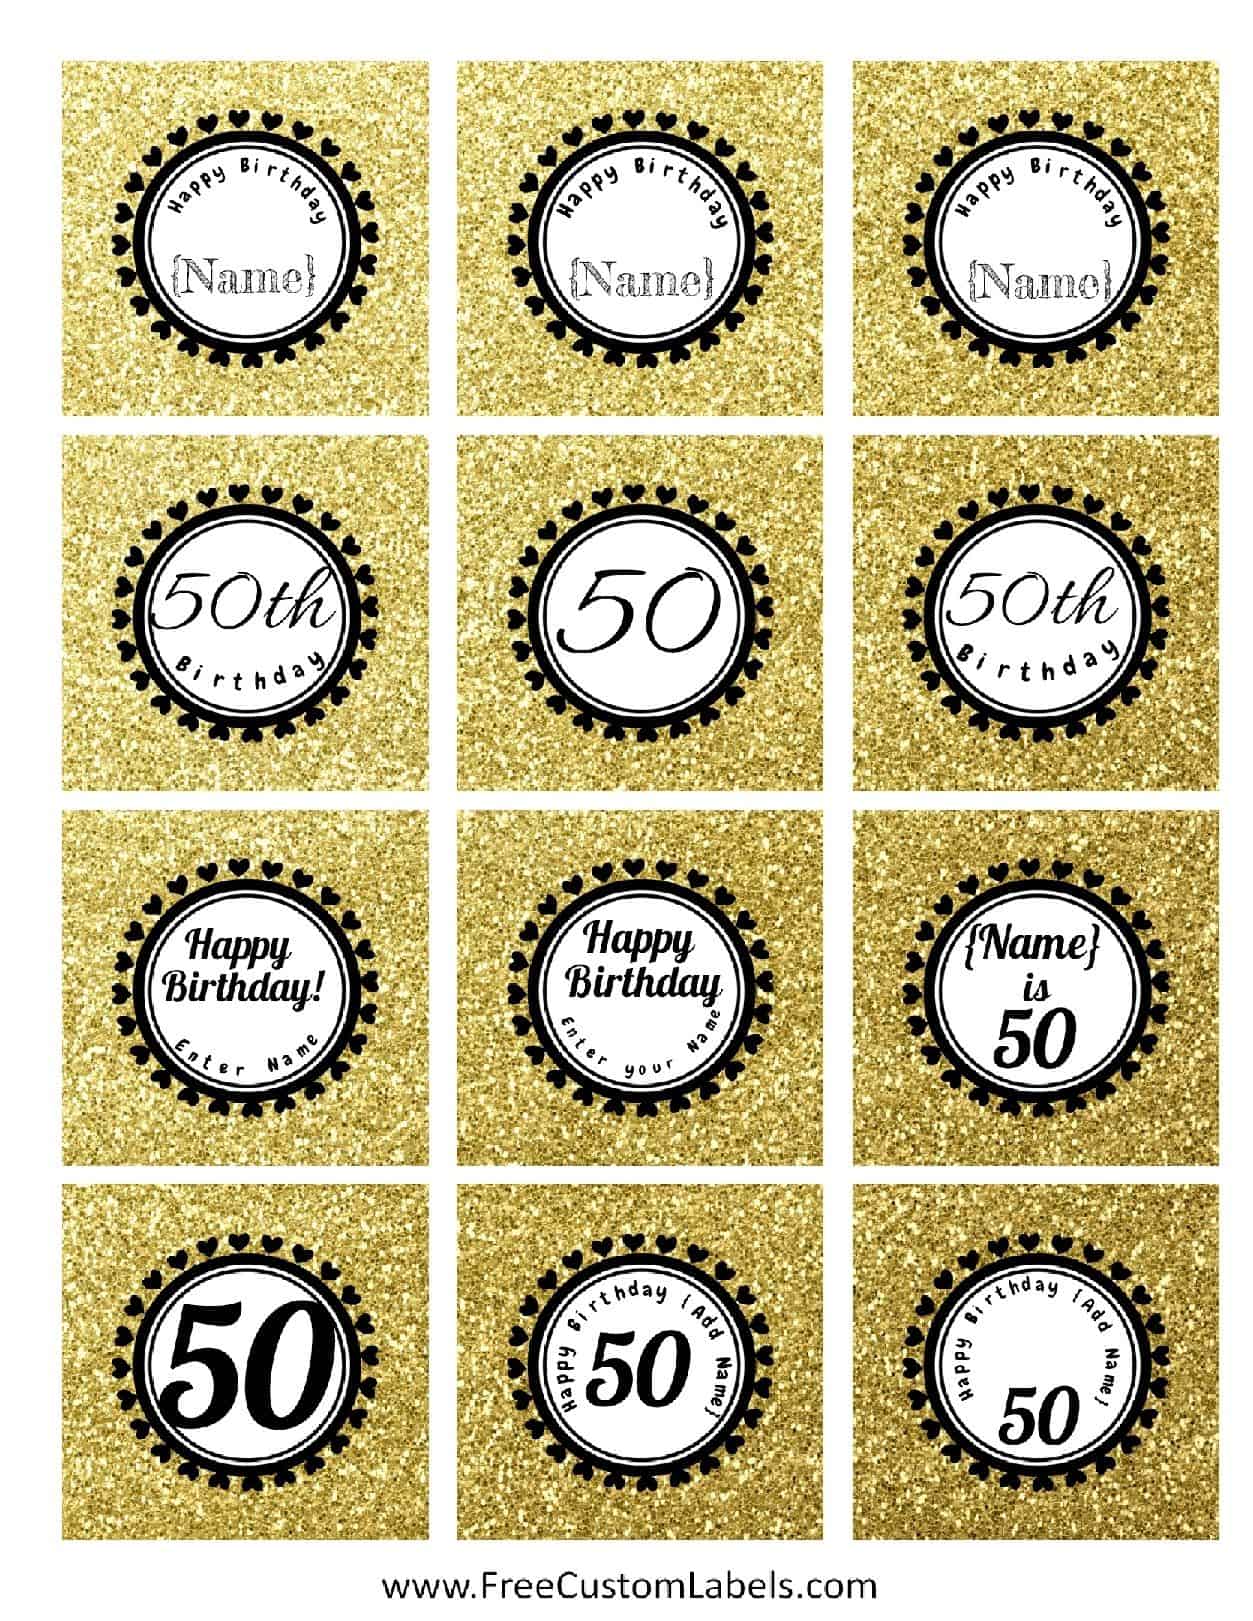 50th Birthday Cupcake Toppers Free And Customizable